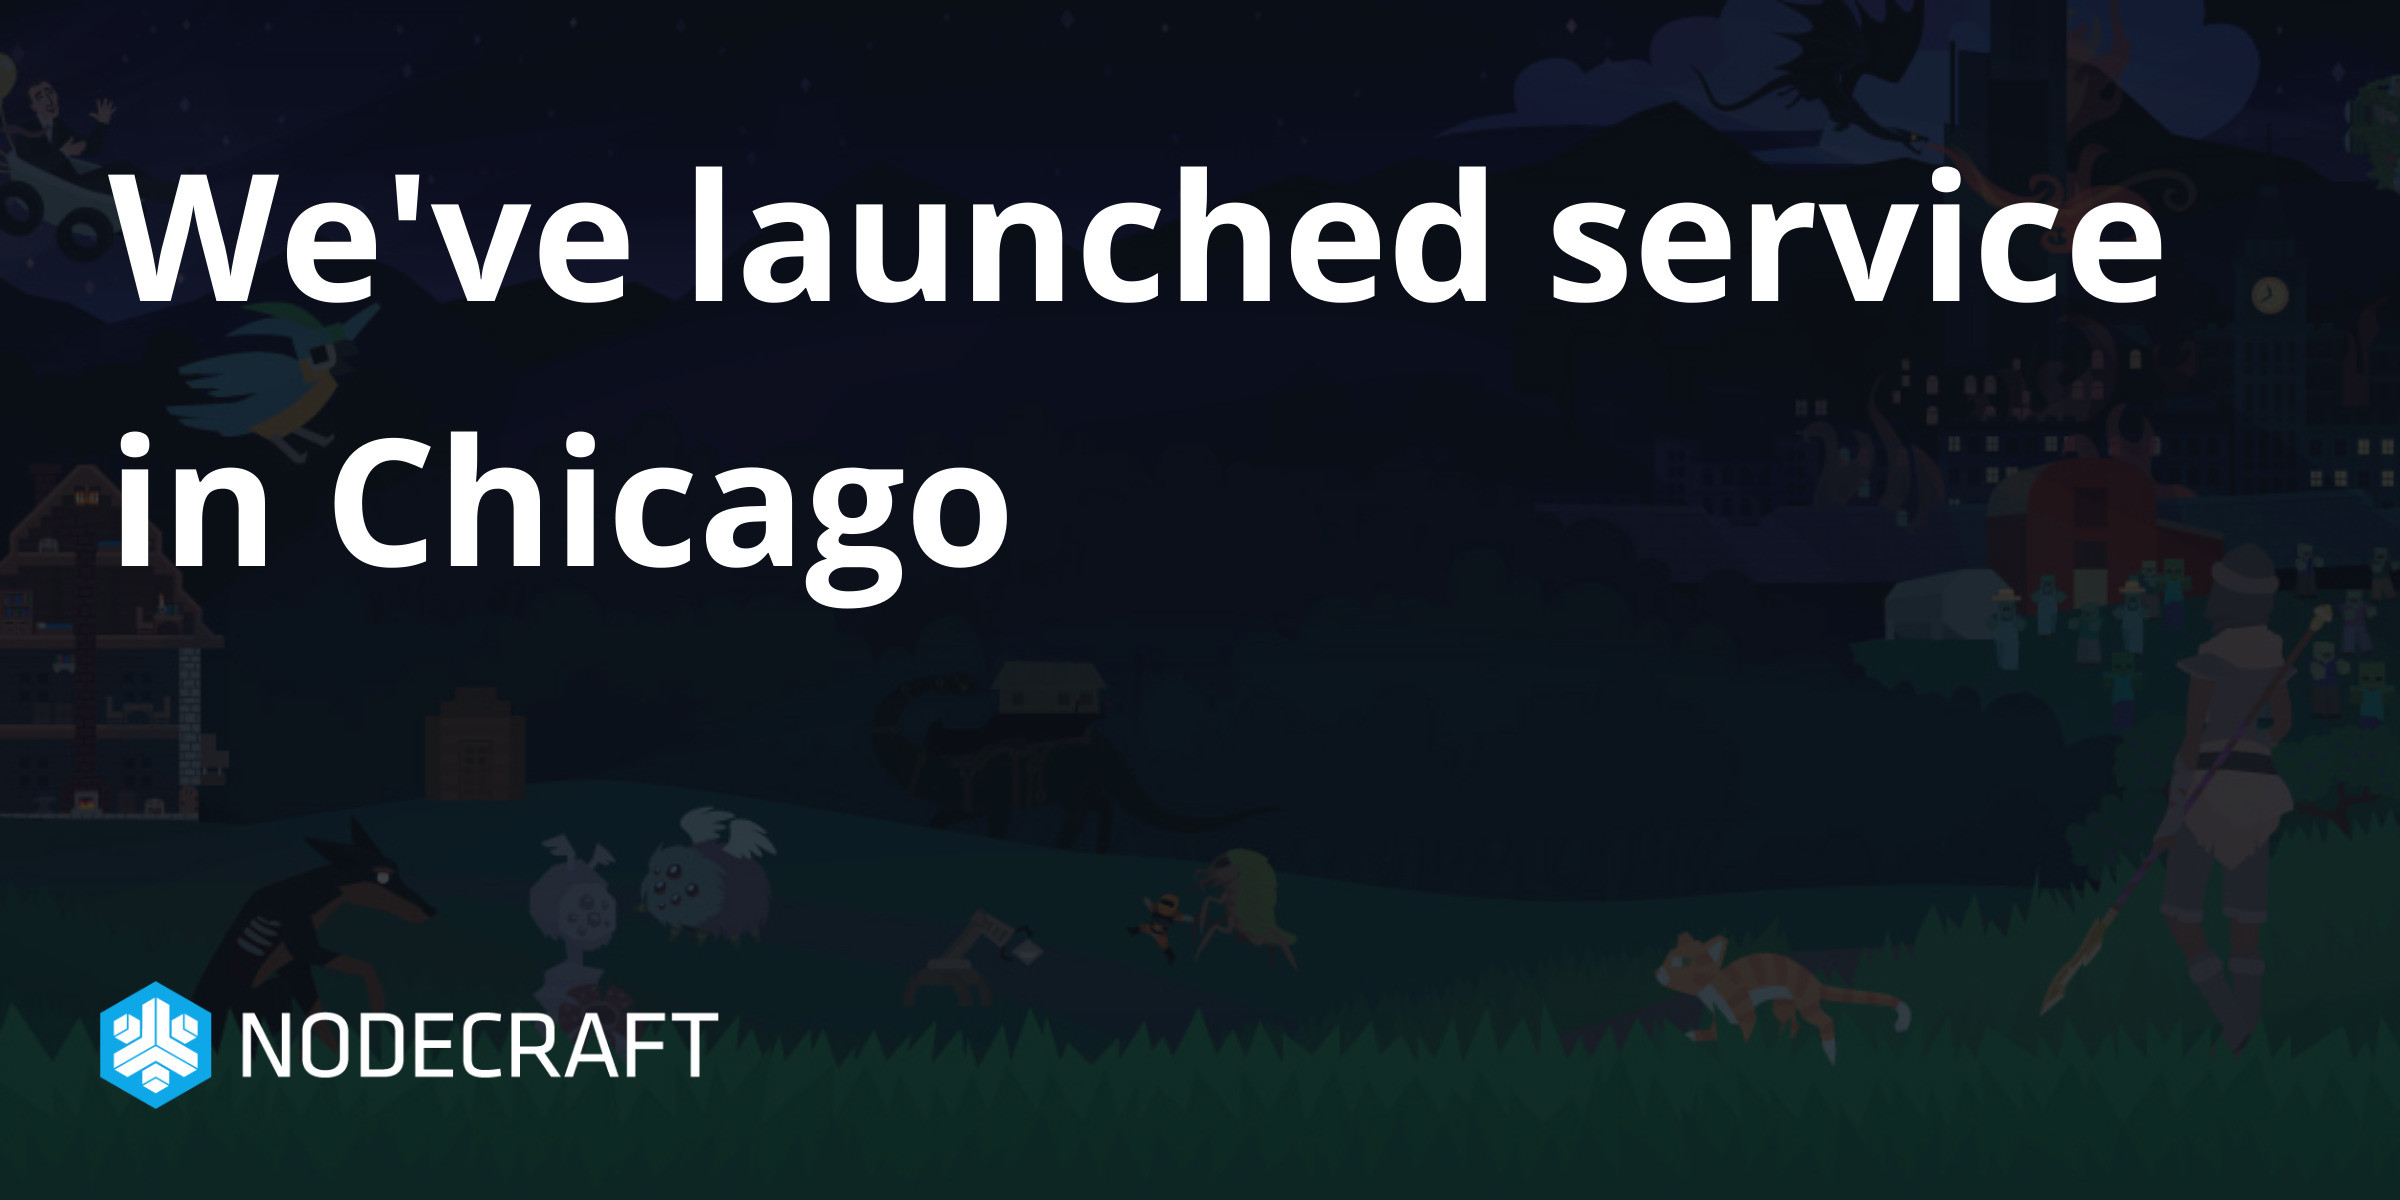 We've launched service in Chicago